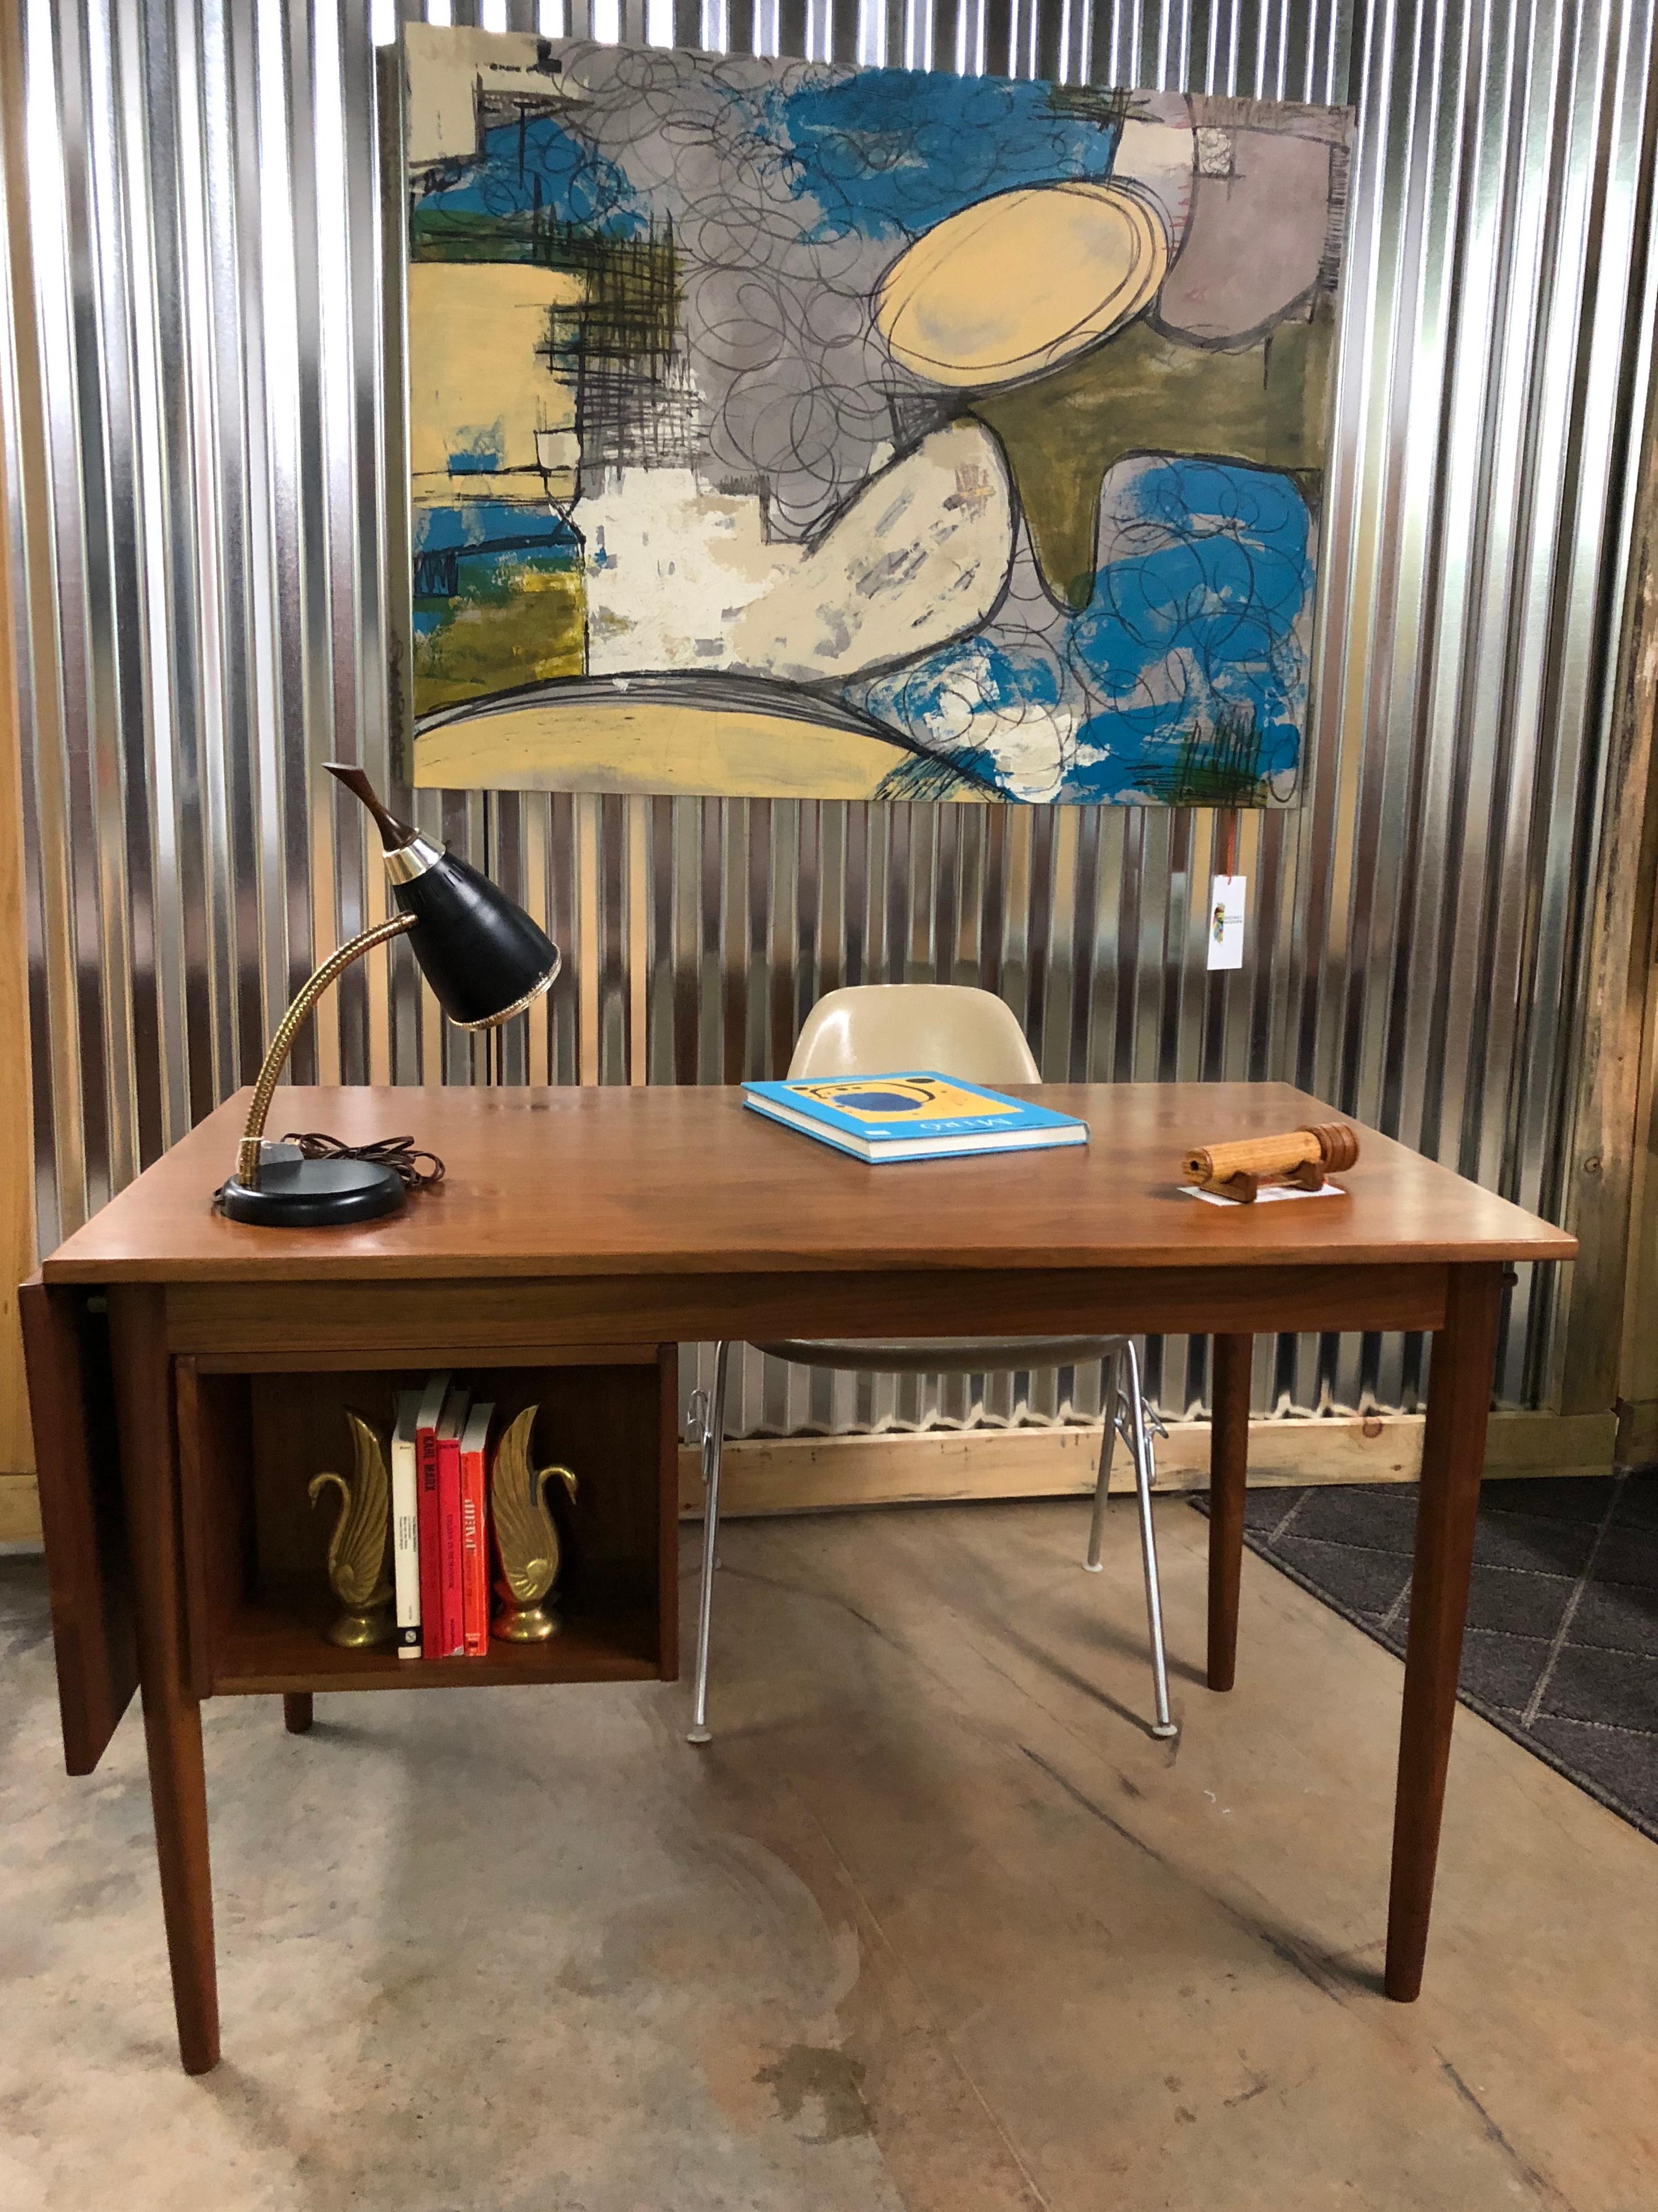 Midcentury Danish modern extendable and reversible teak desk by Arne Vodder. This very versatile desk is sure to fit your needs. Whether you need it to be short, long, right handed, or left handed this desk can accommodate you. The top has a drop